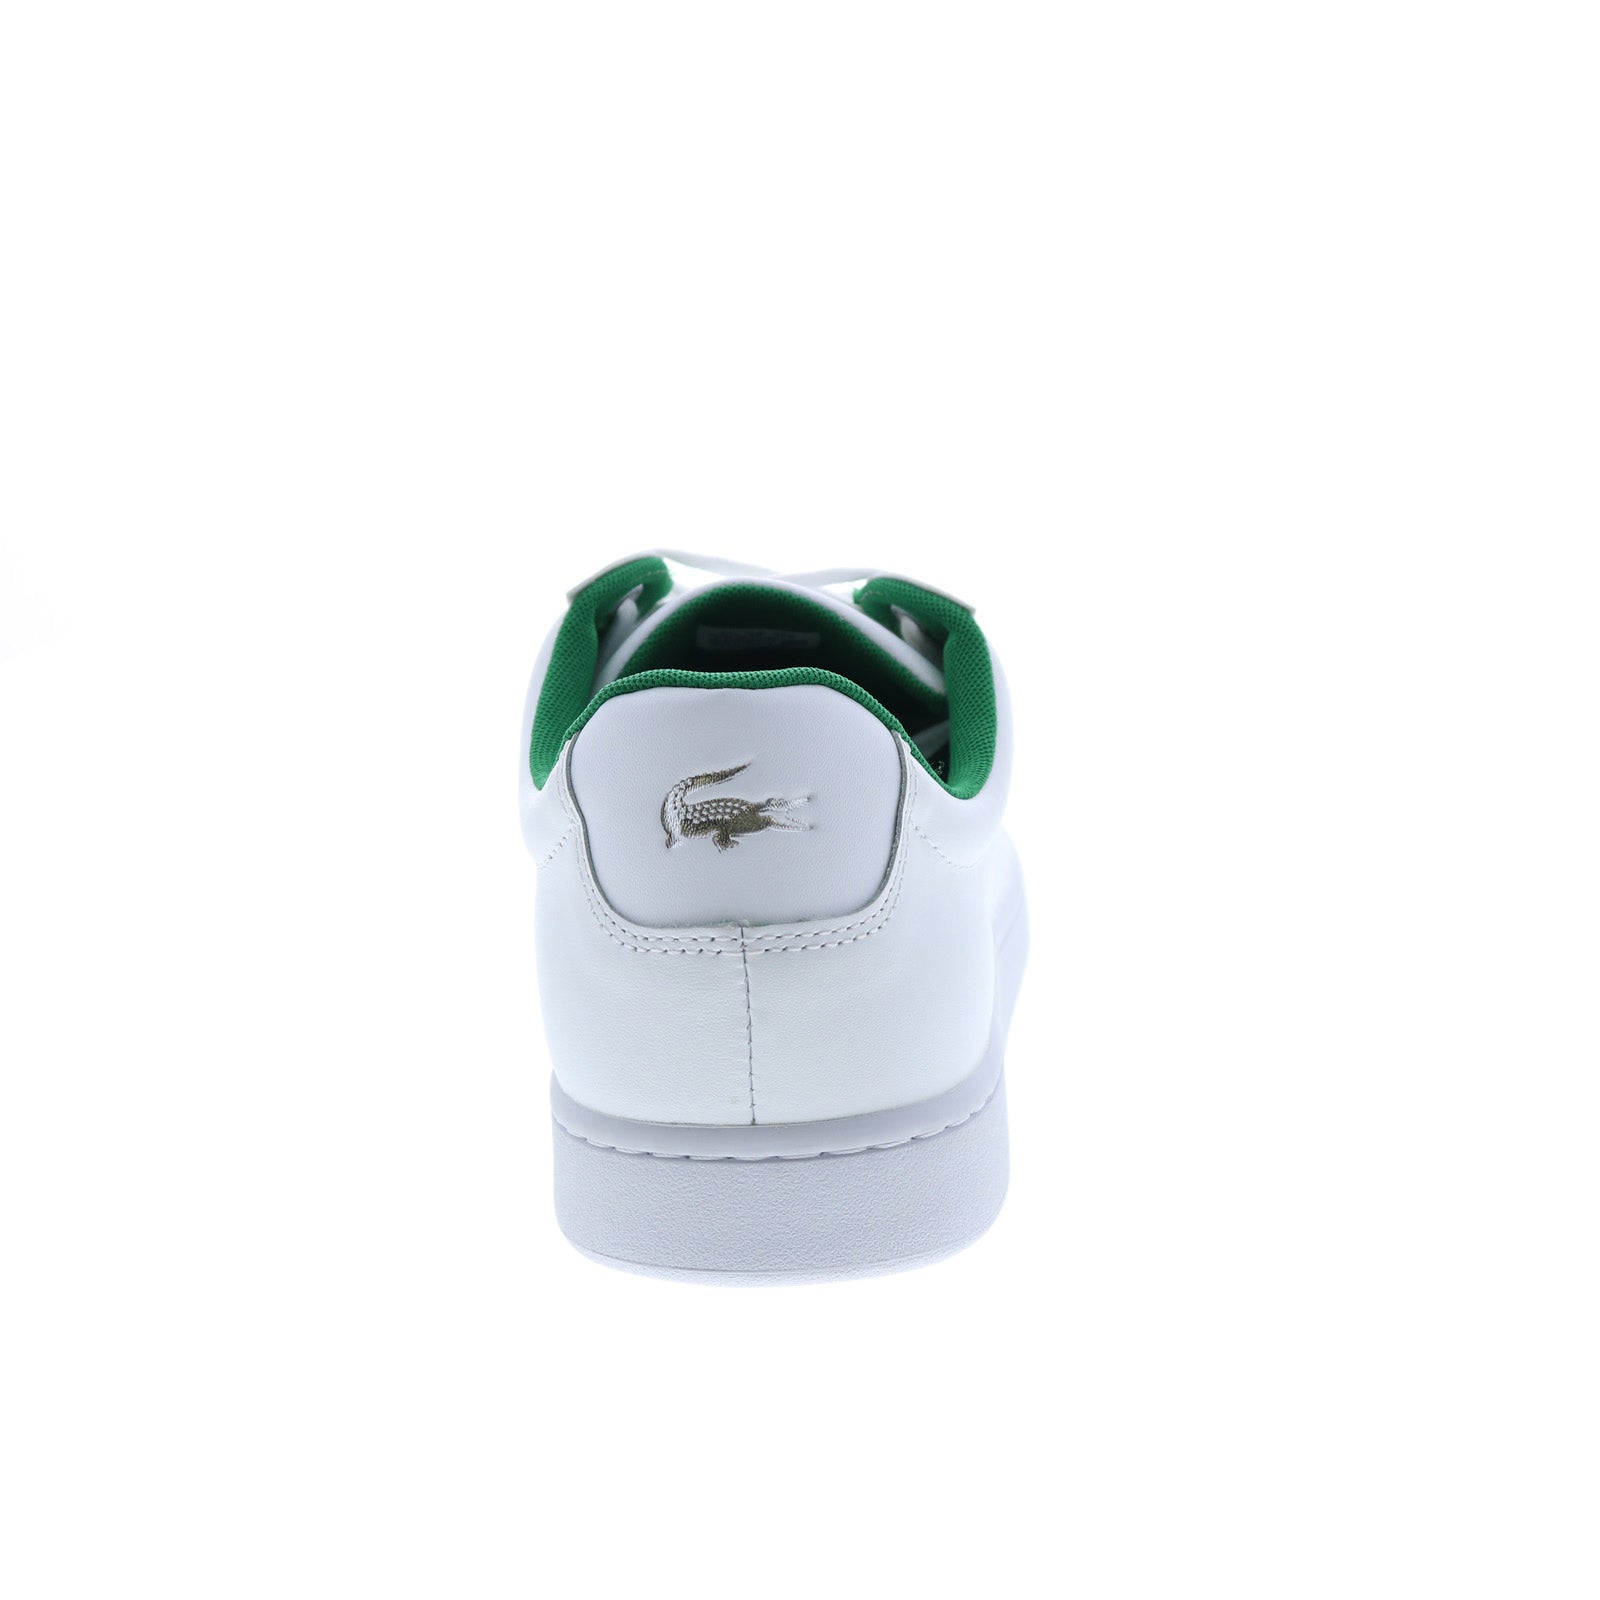 Lacoste Hydez 119 1 P Sma Mens White Leather Lifestyle Sneakers Shoes ...